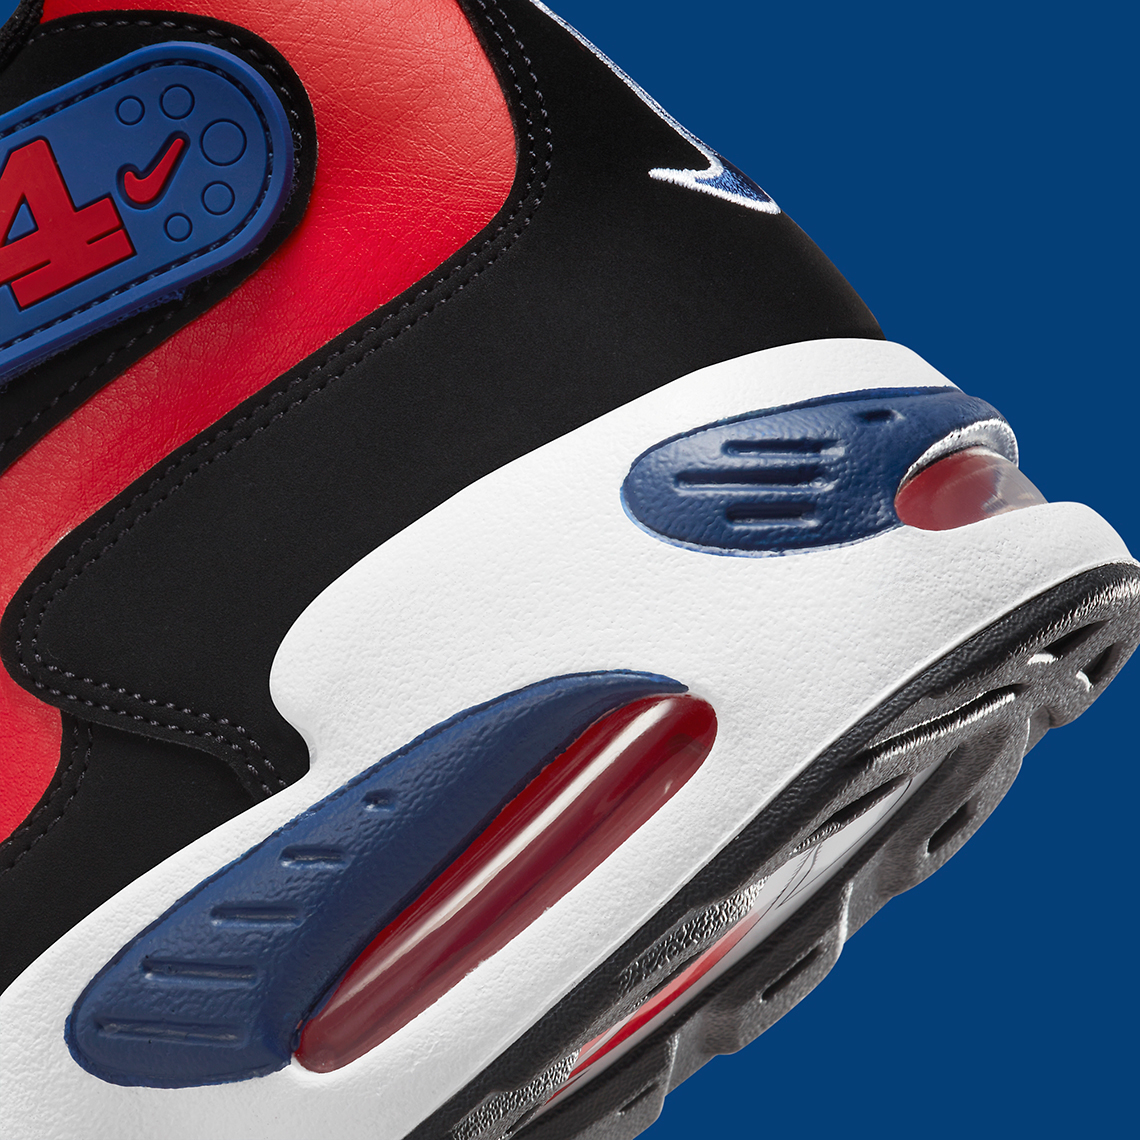 nike-air-griffey-max-1-navy-red-release-date-7.jpg